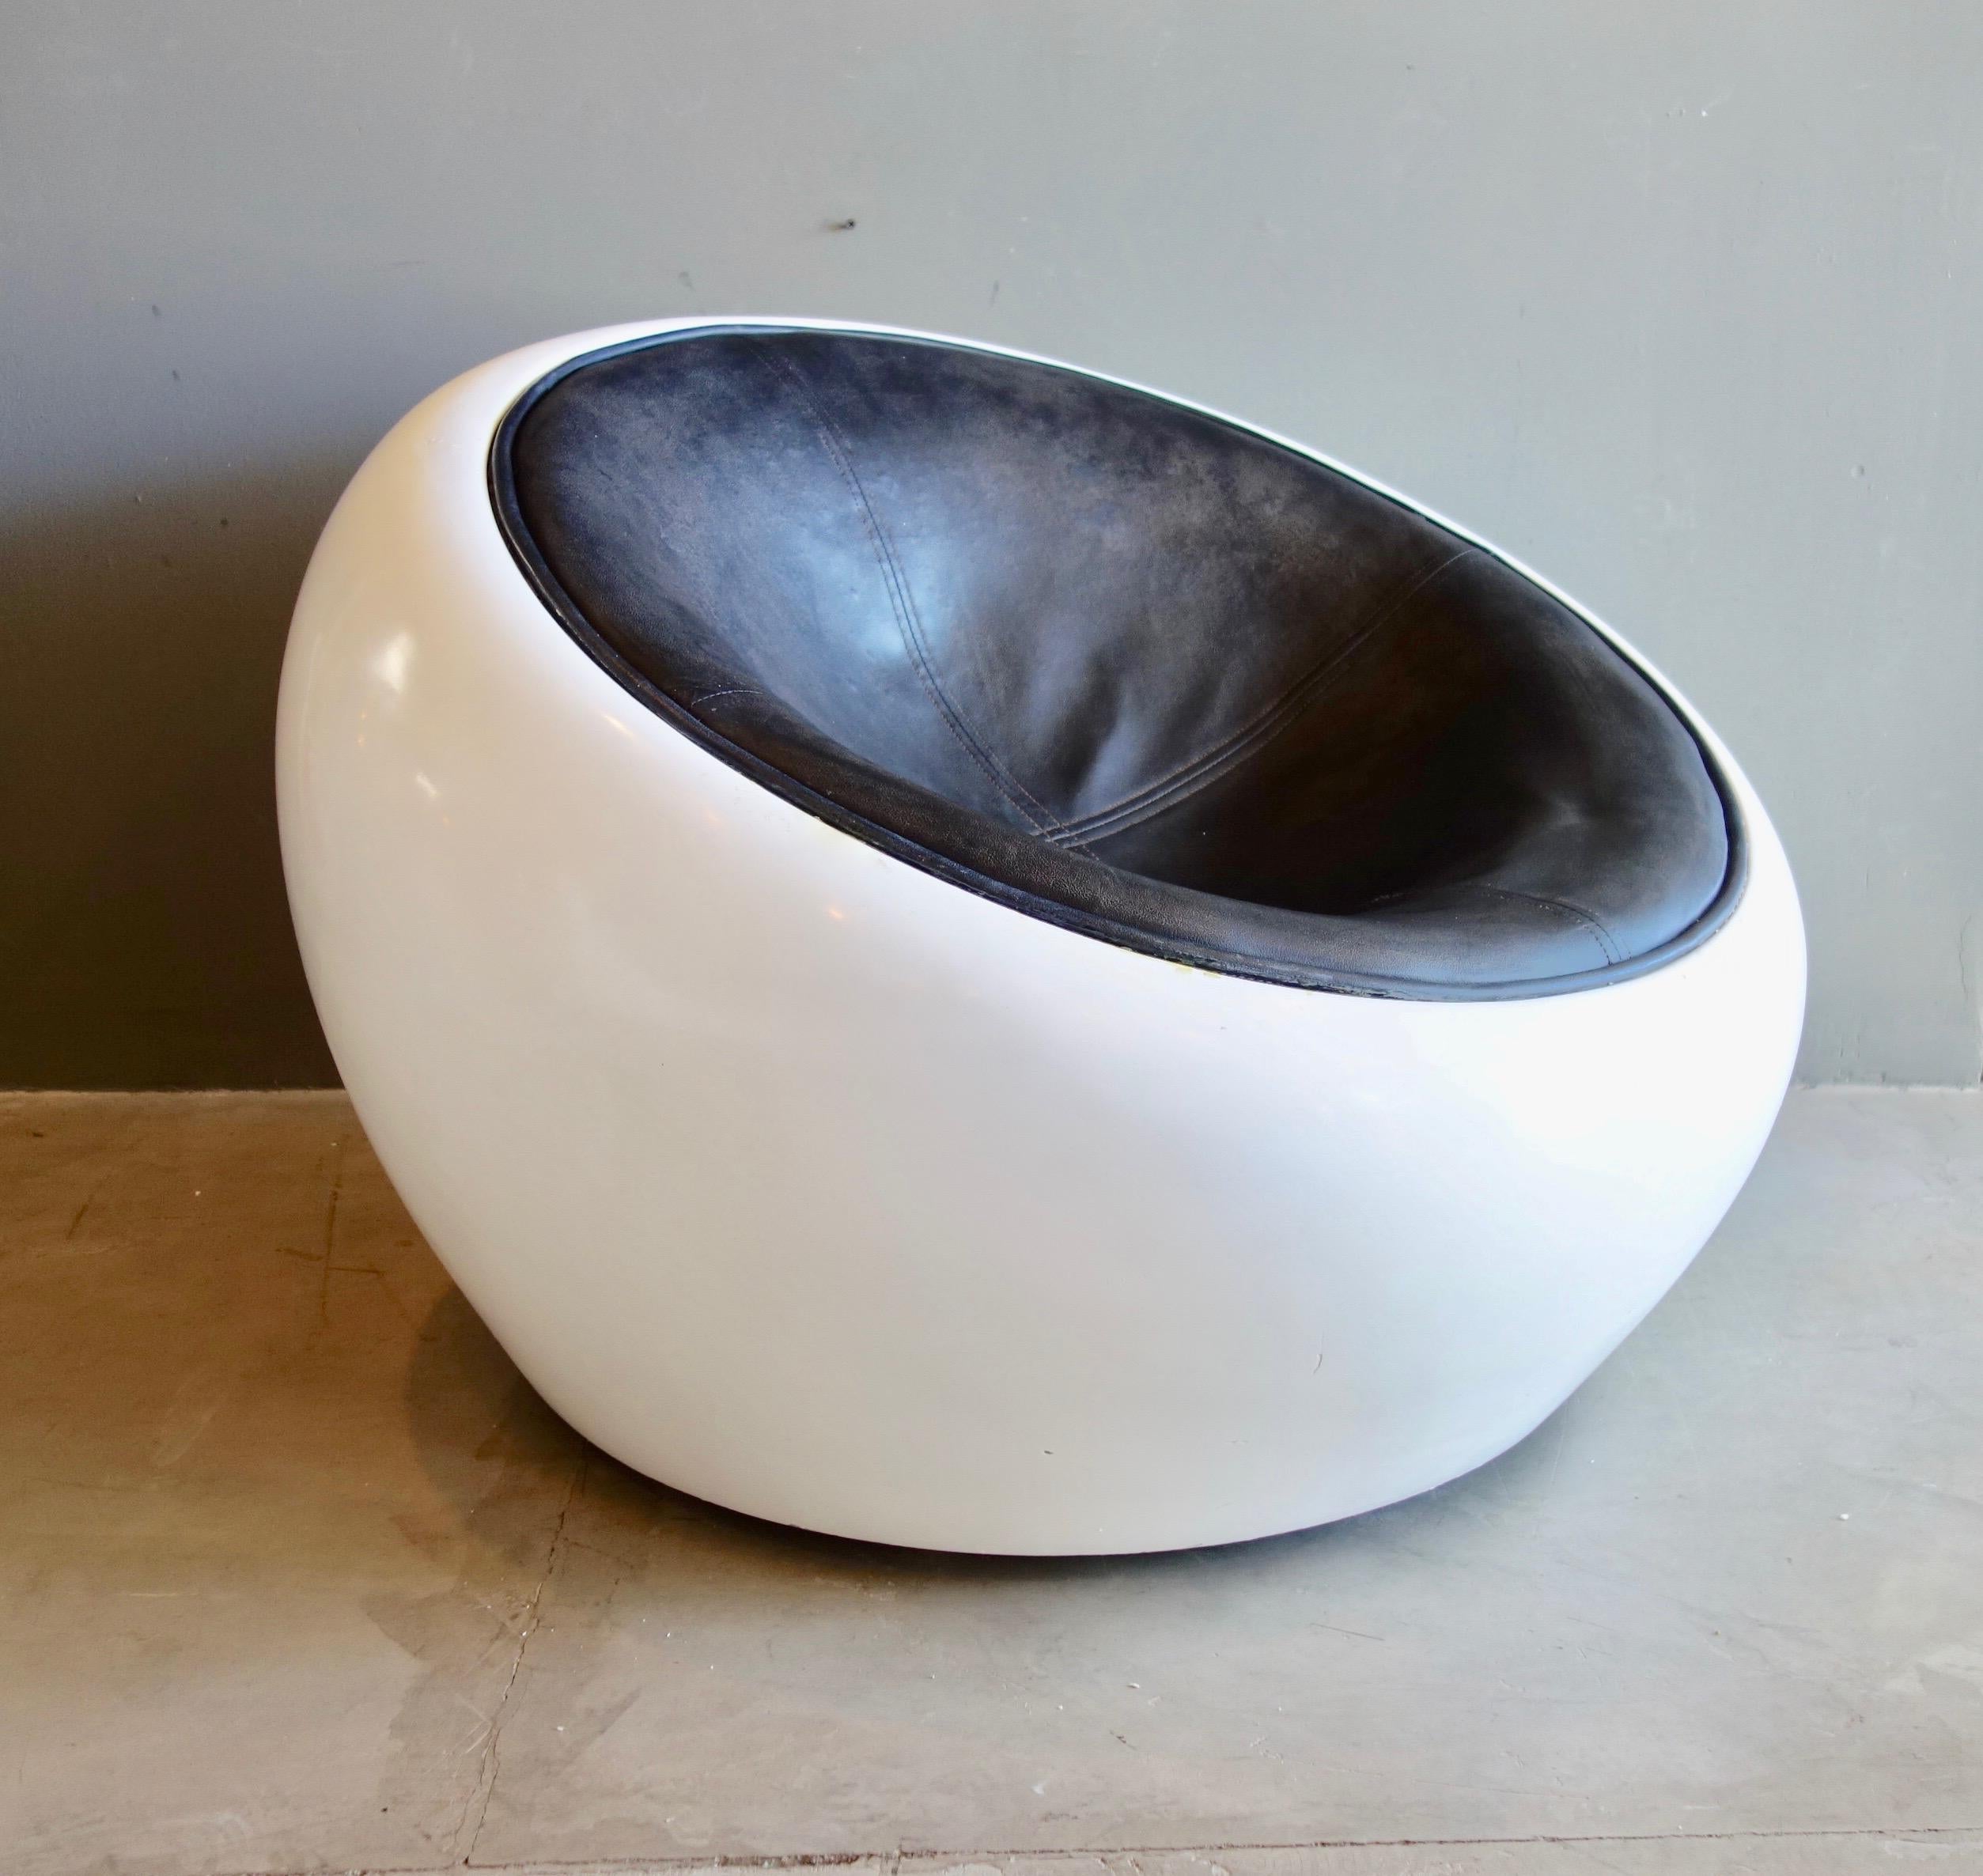 Amazing pair of white fiberglass pod chairs with black leather circular seats. Great scale. Stylish yet comfortable chairs that make a giant statement in your living space. So cool!

 